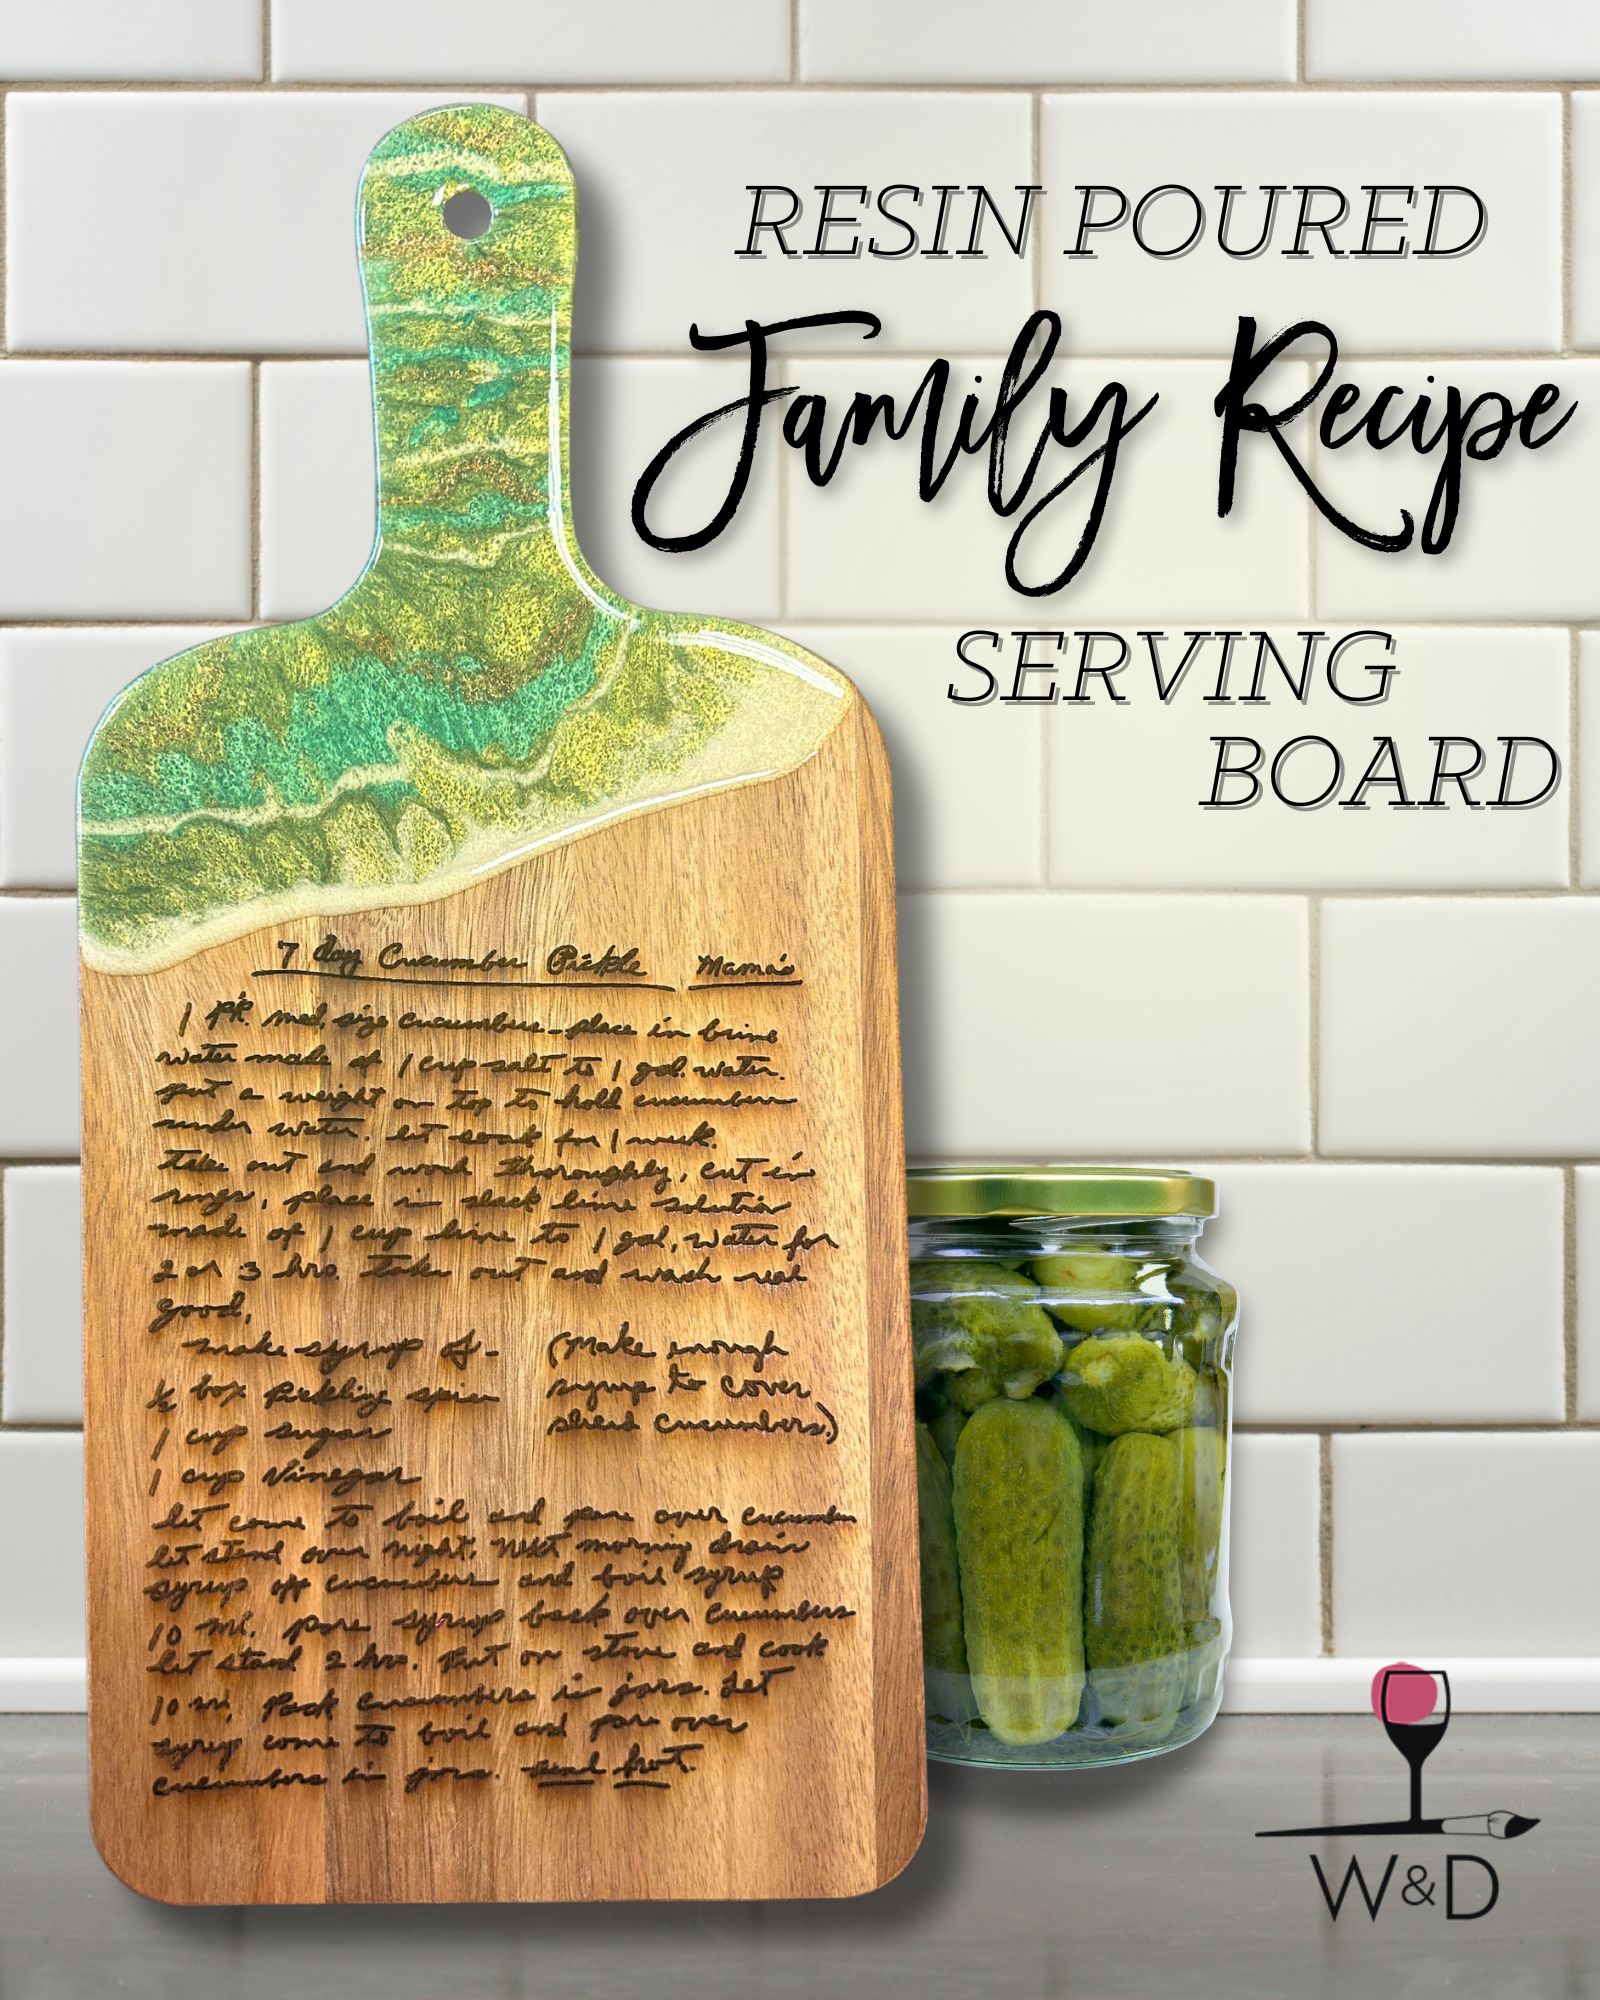 Resin Poured Family Recipe Serving Board